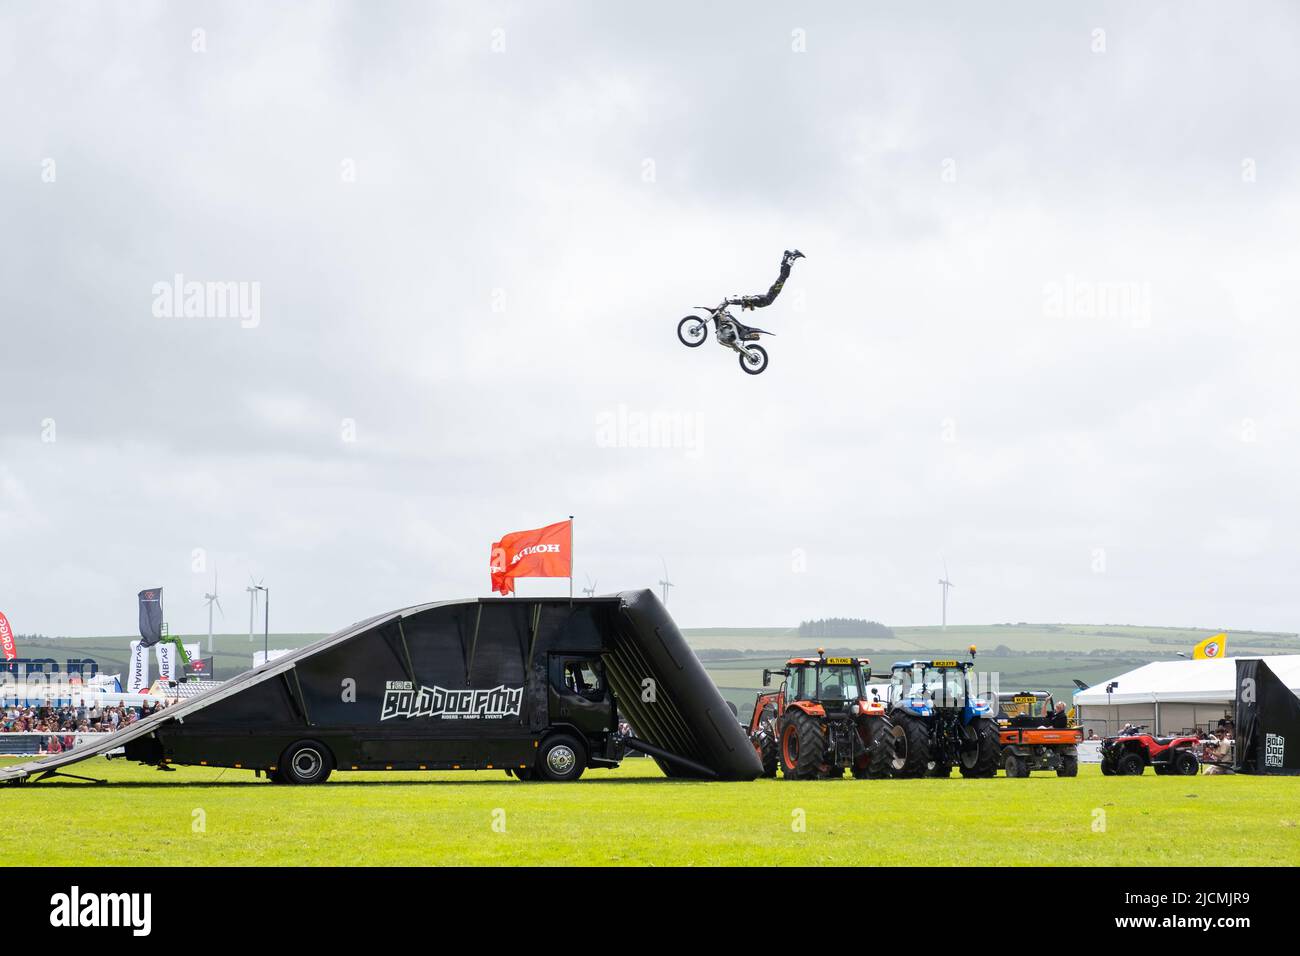 Members of the Bolddog FMX motorcycle stunt riding team riding at speed to clear tractors and slopes whilst doing amazing dangerous arial stunt tricks Stock Photo